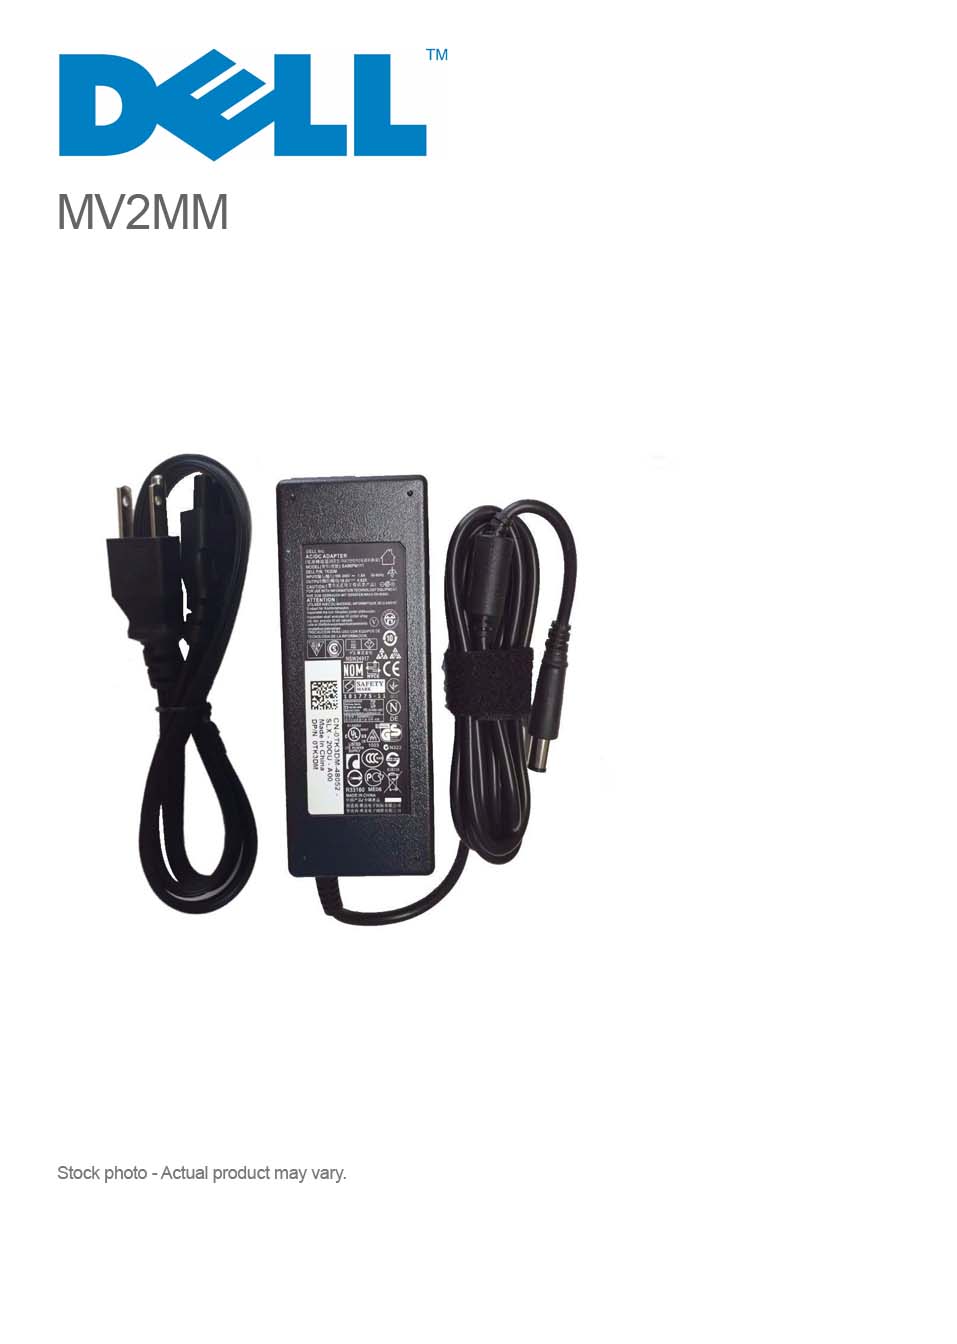 Original 90w 19 5v 4 62a Dell Mv2mm Ac Adapter Charger With Power Cord Compupoint